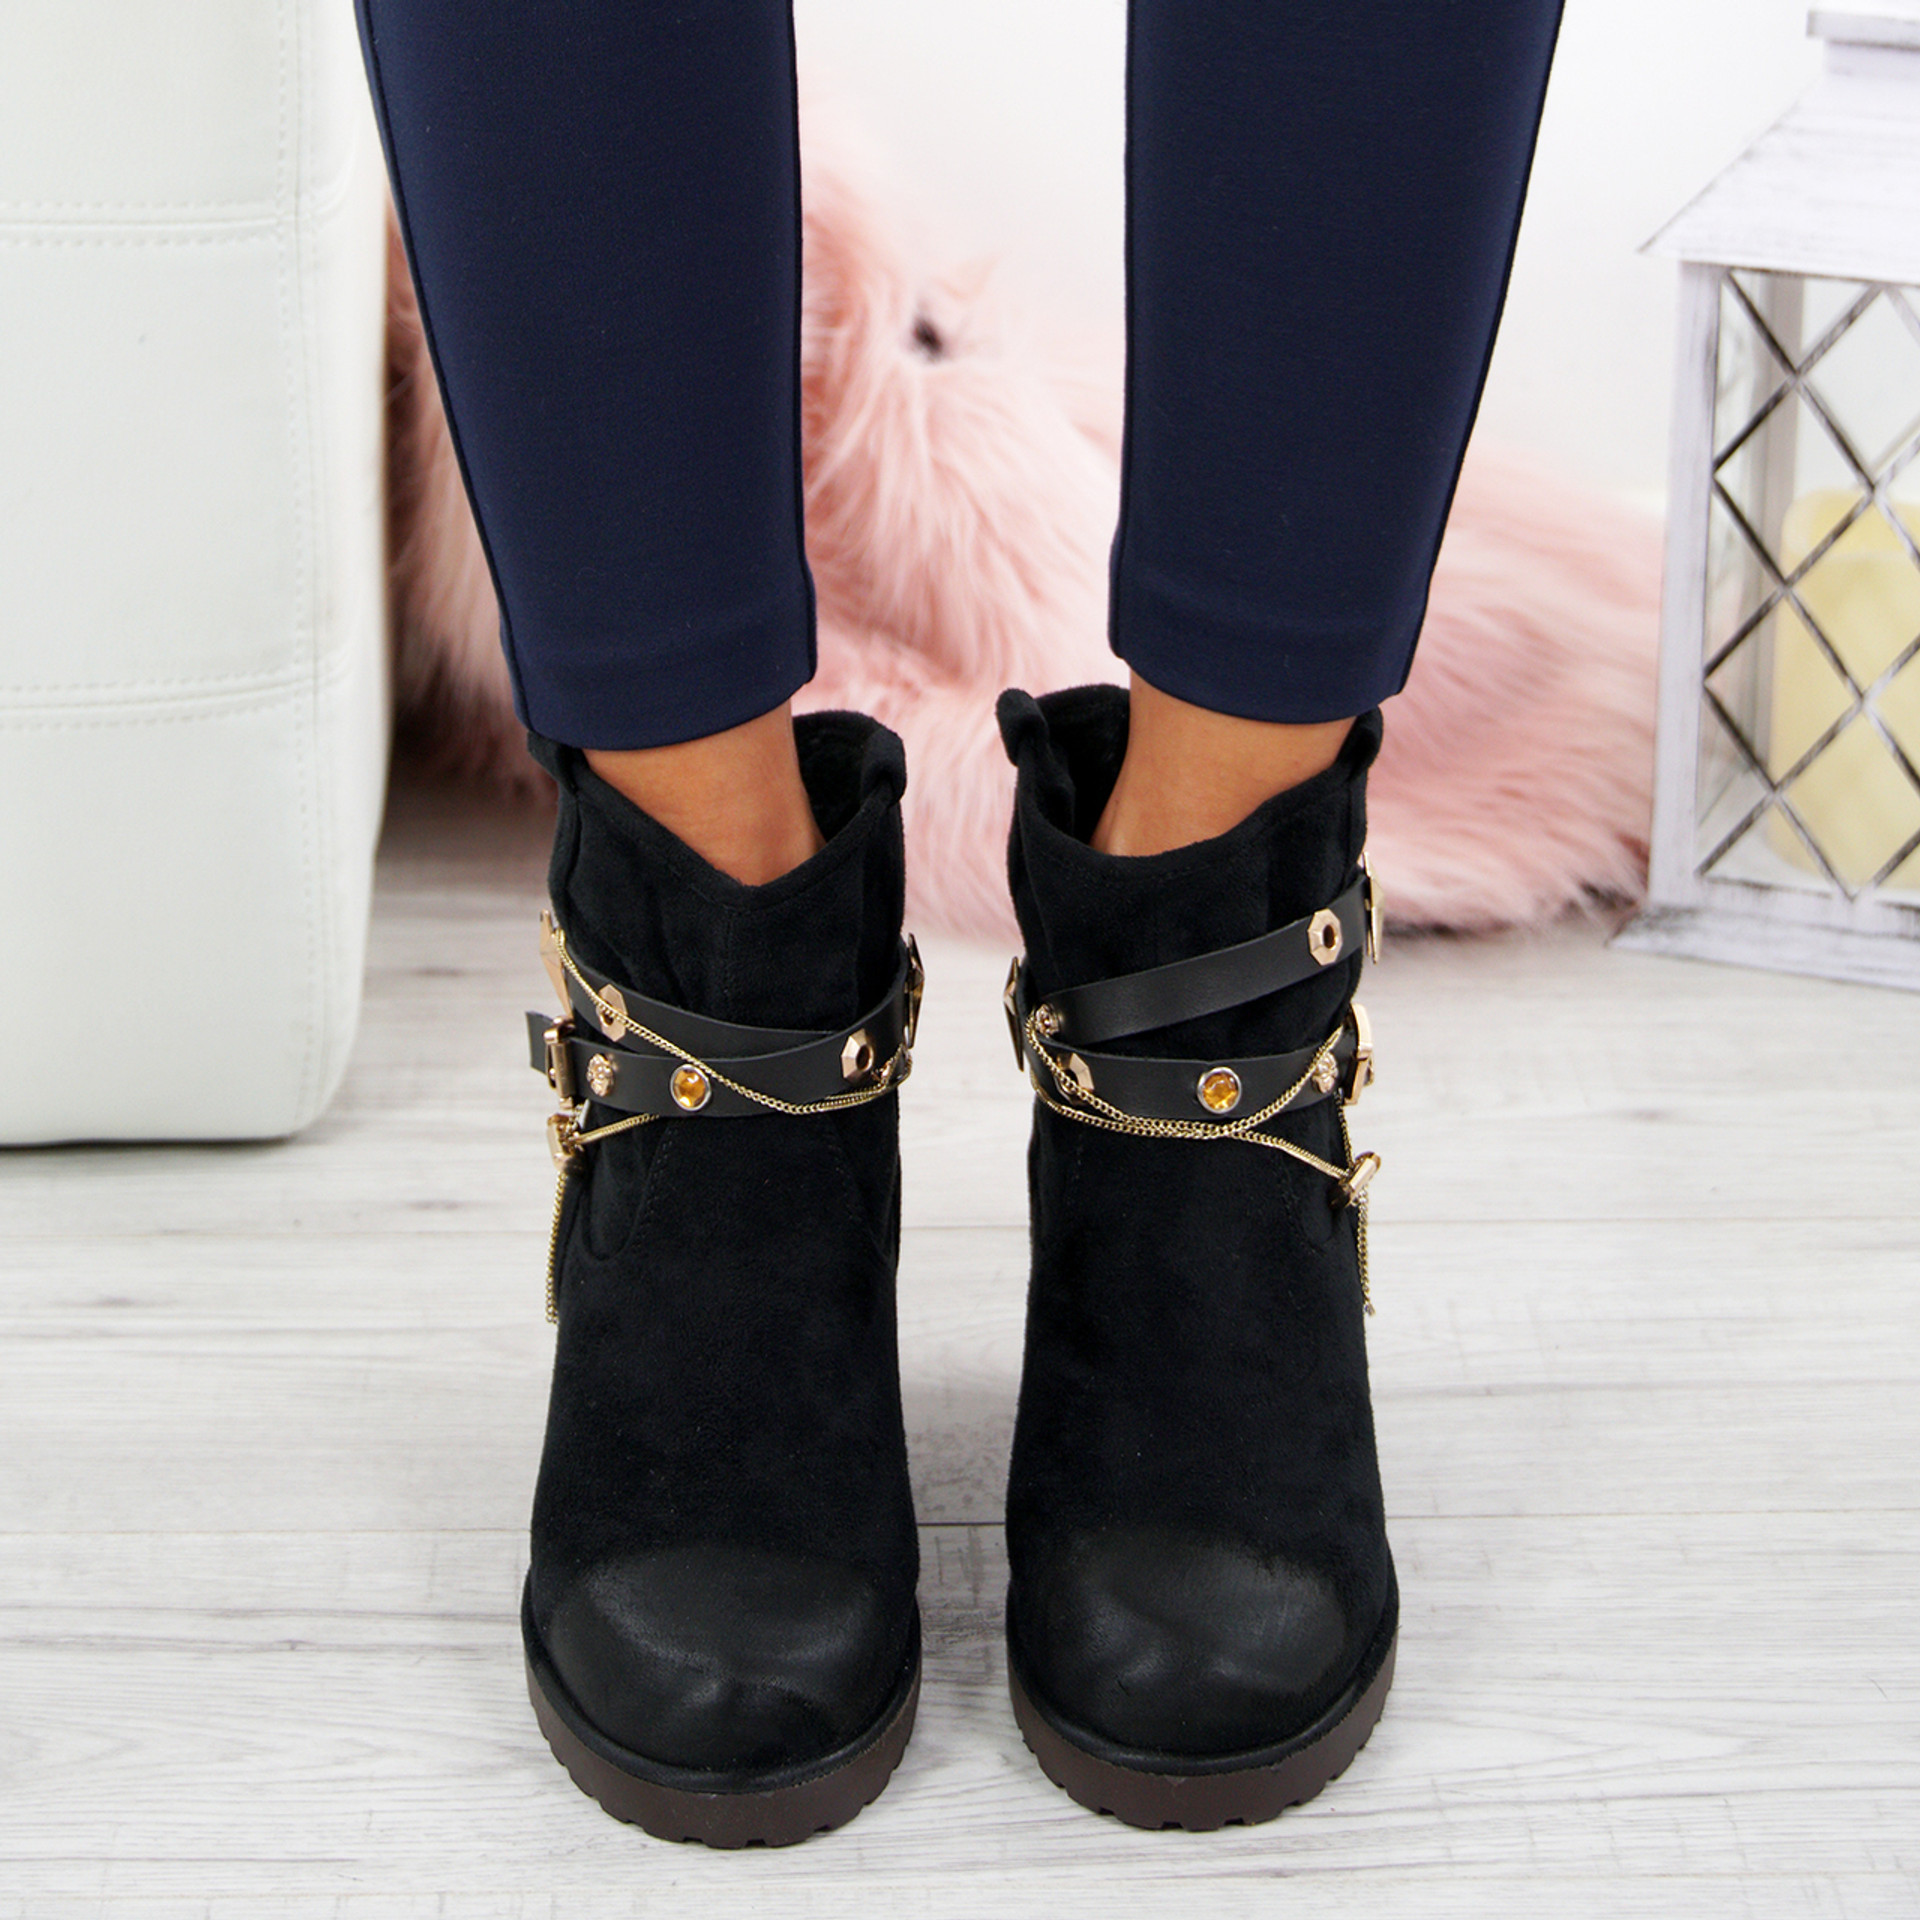 Isabell Black Wedge Ankle Boots